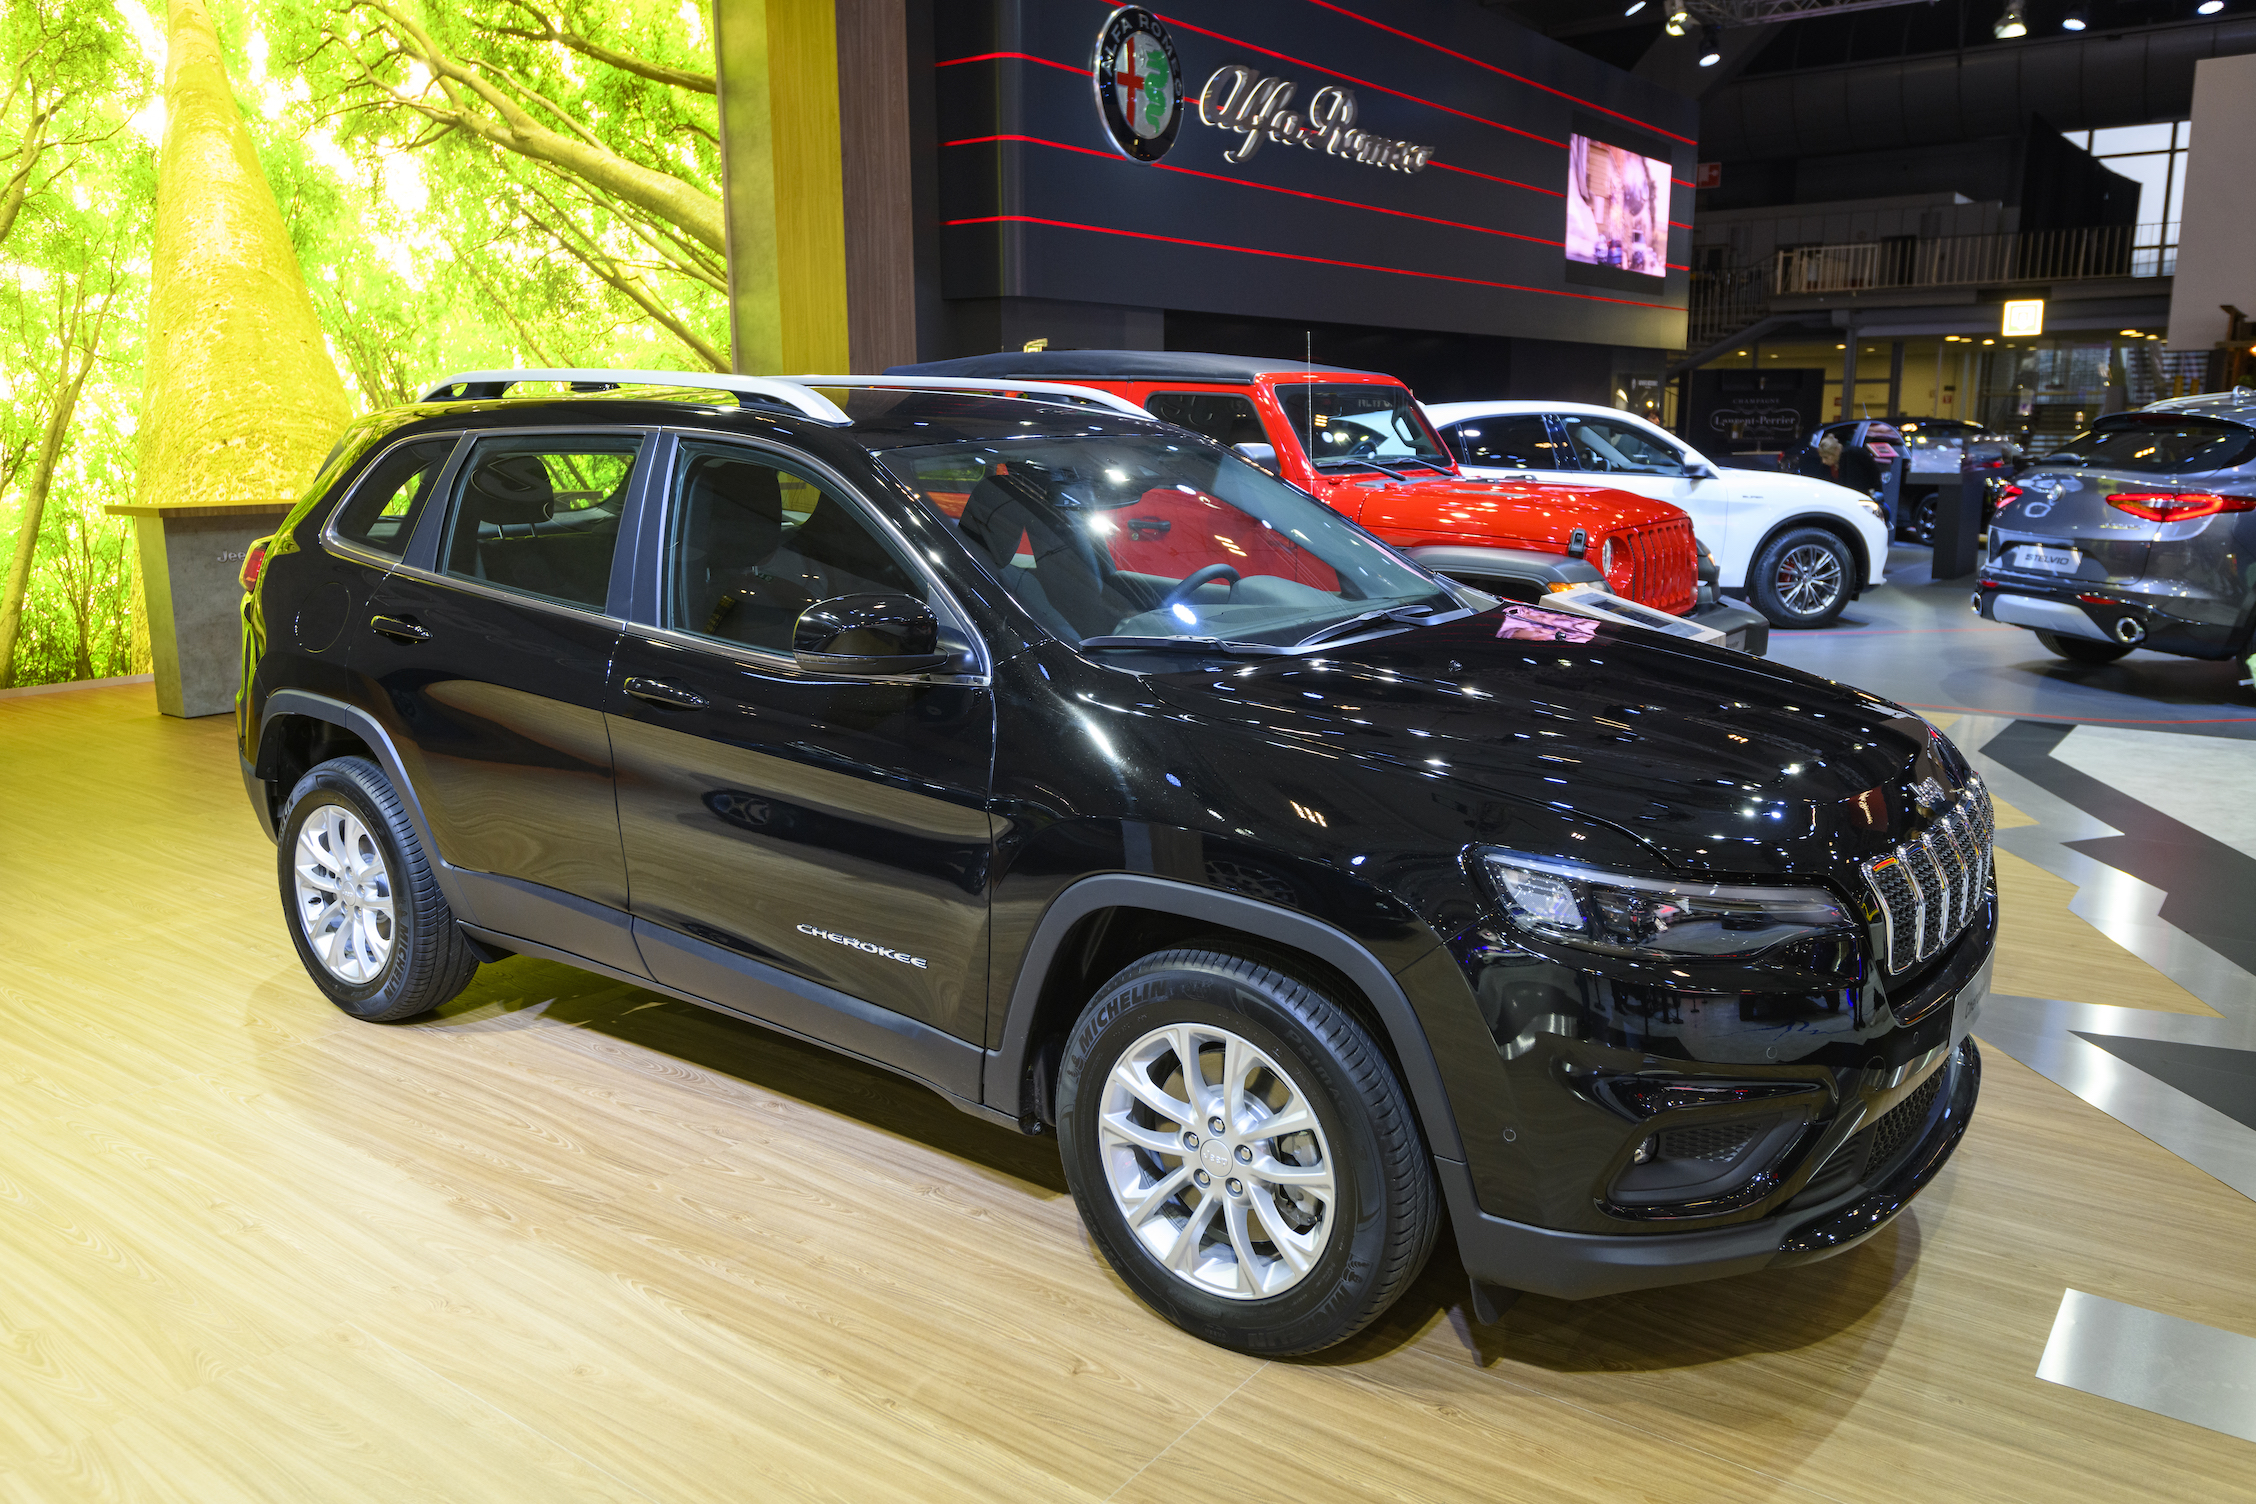 Jeep Cherokee luxury SUV on display at Brussels Expo